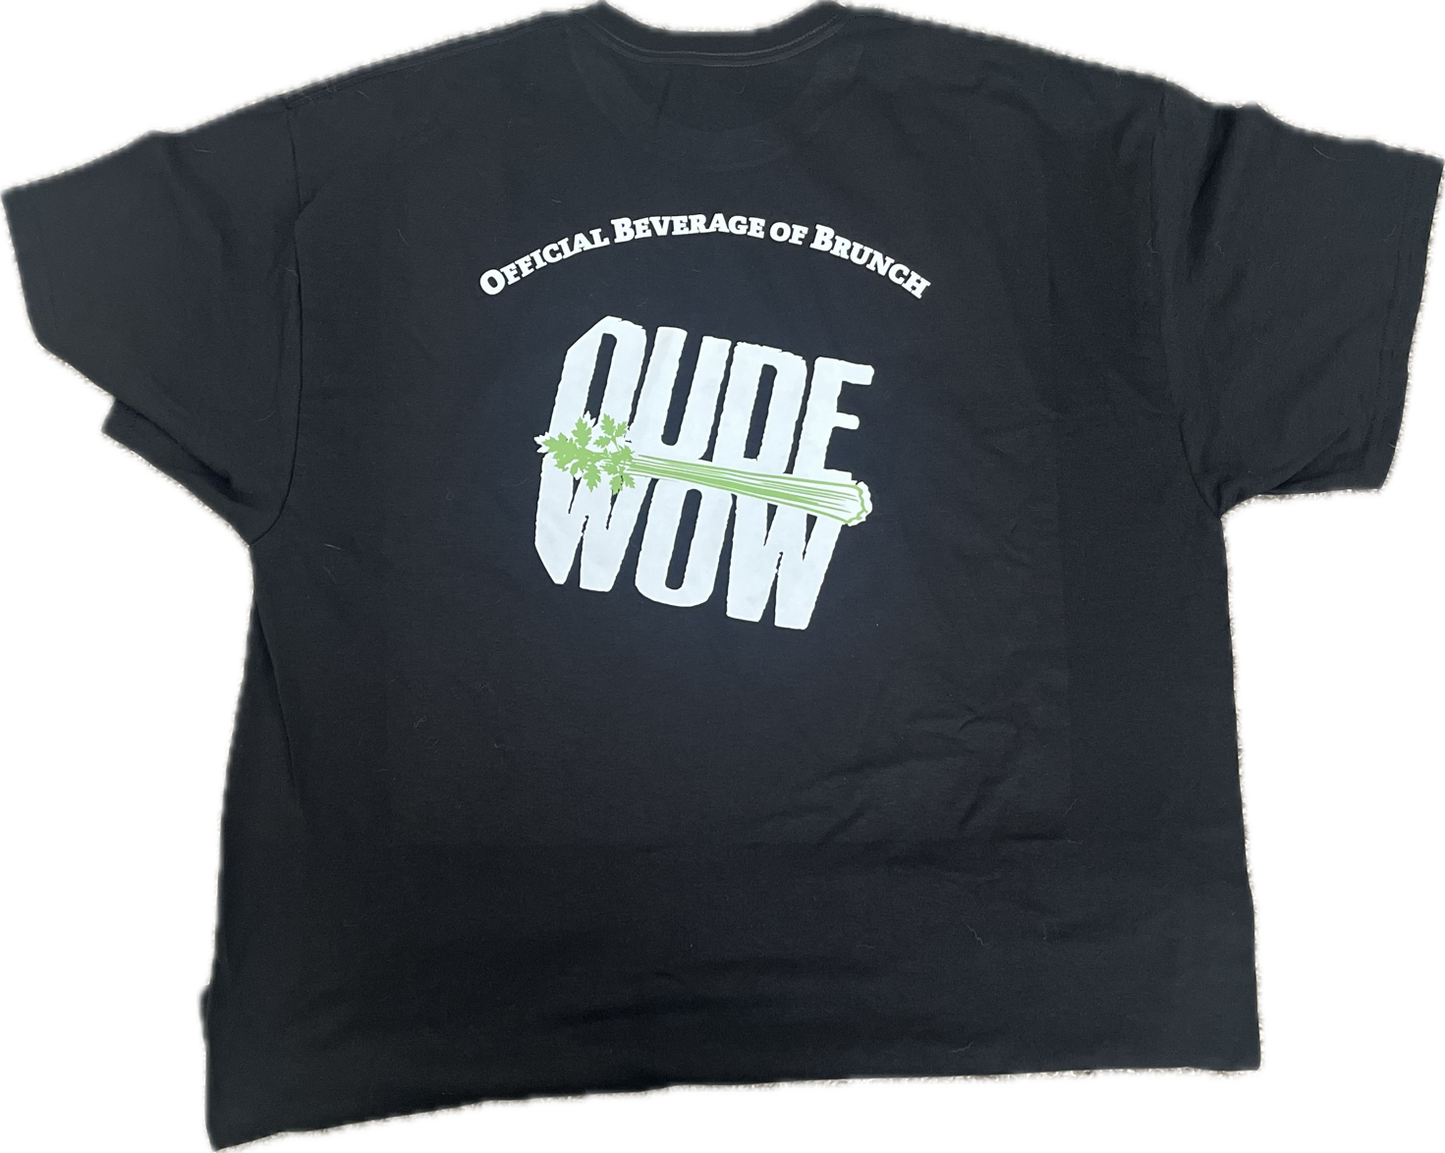 Dude Wow "Official Beverage of Brunch" Tshirt